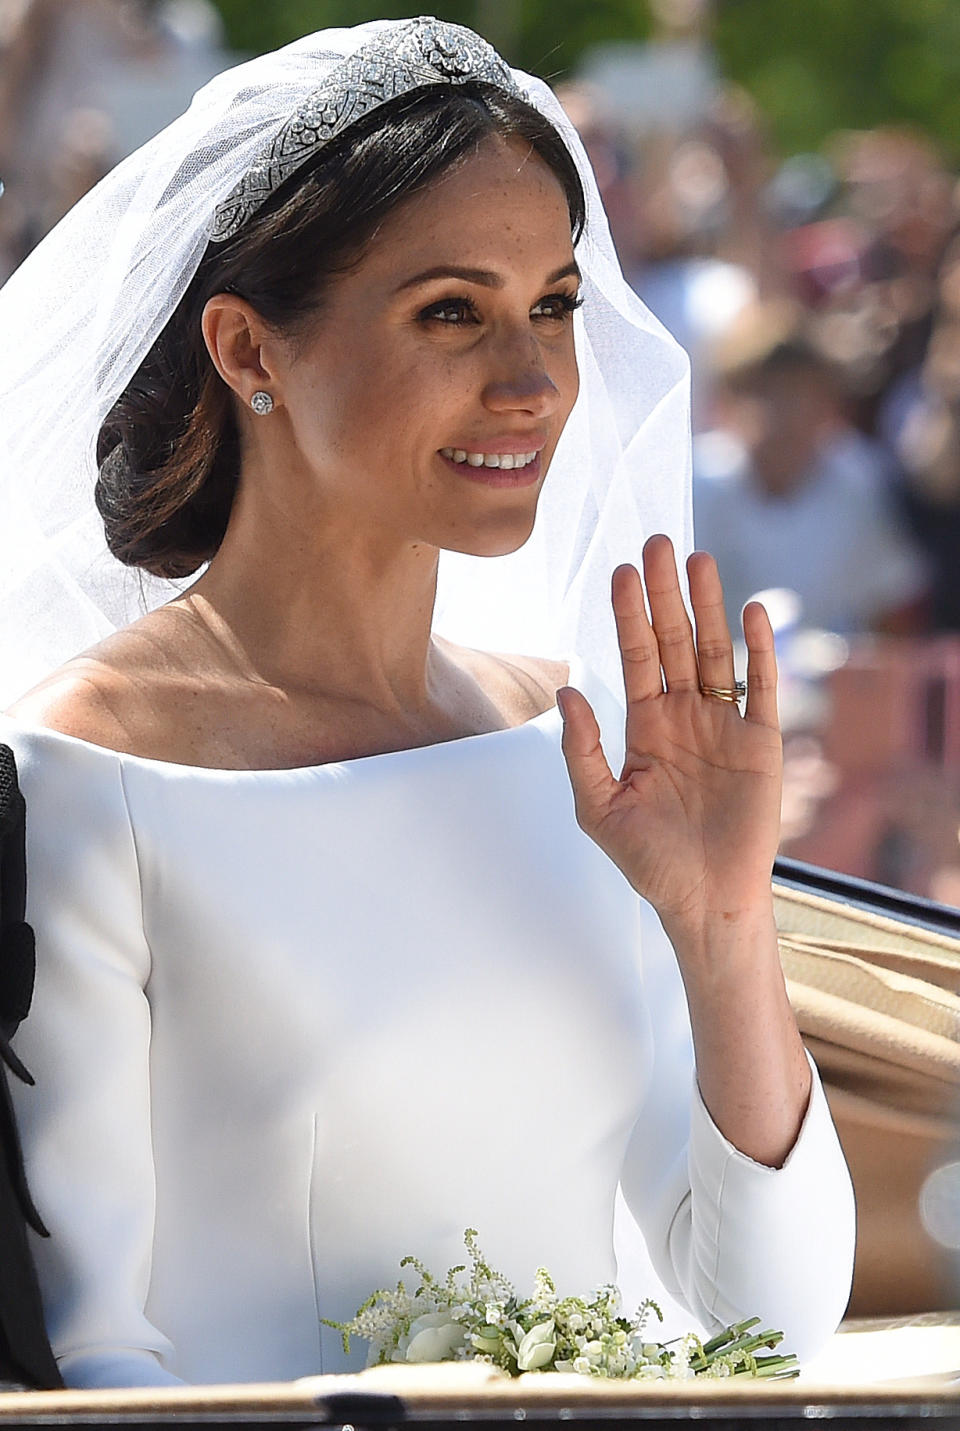 The Duchess of Sussex hopes to be an effective royal [Photo: Getty]